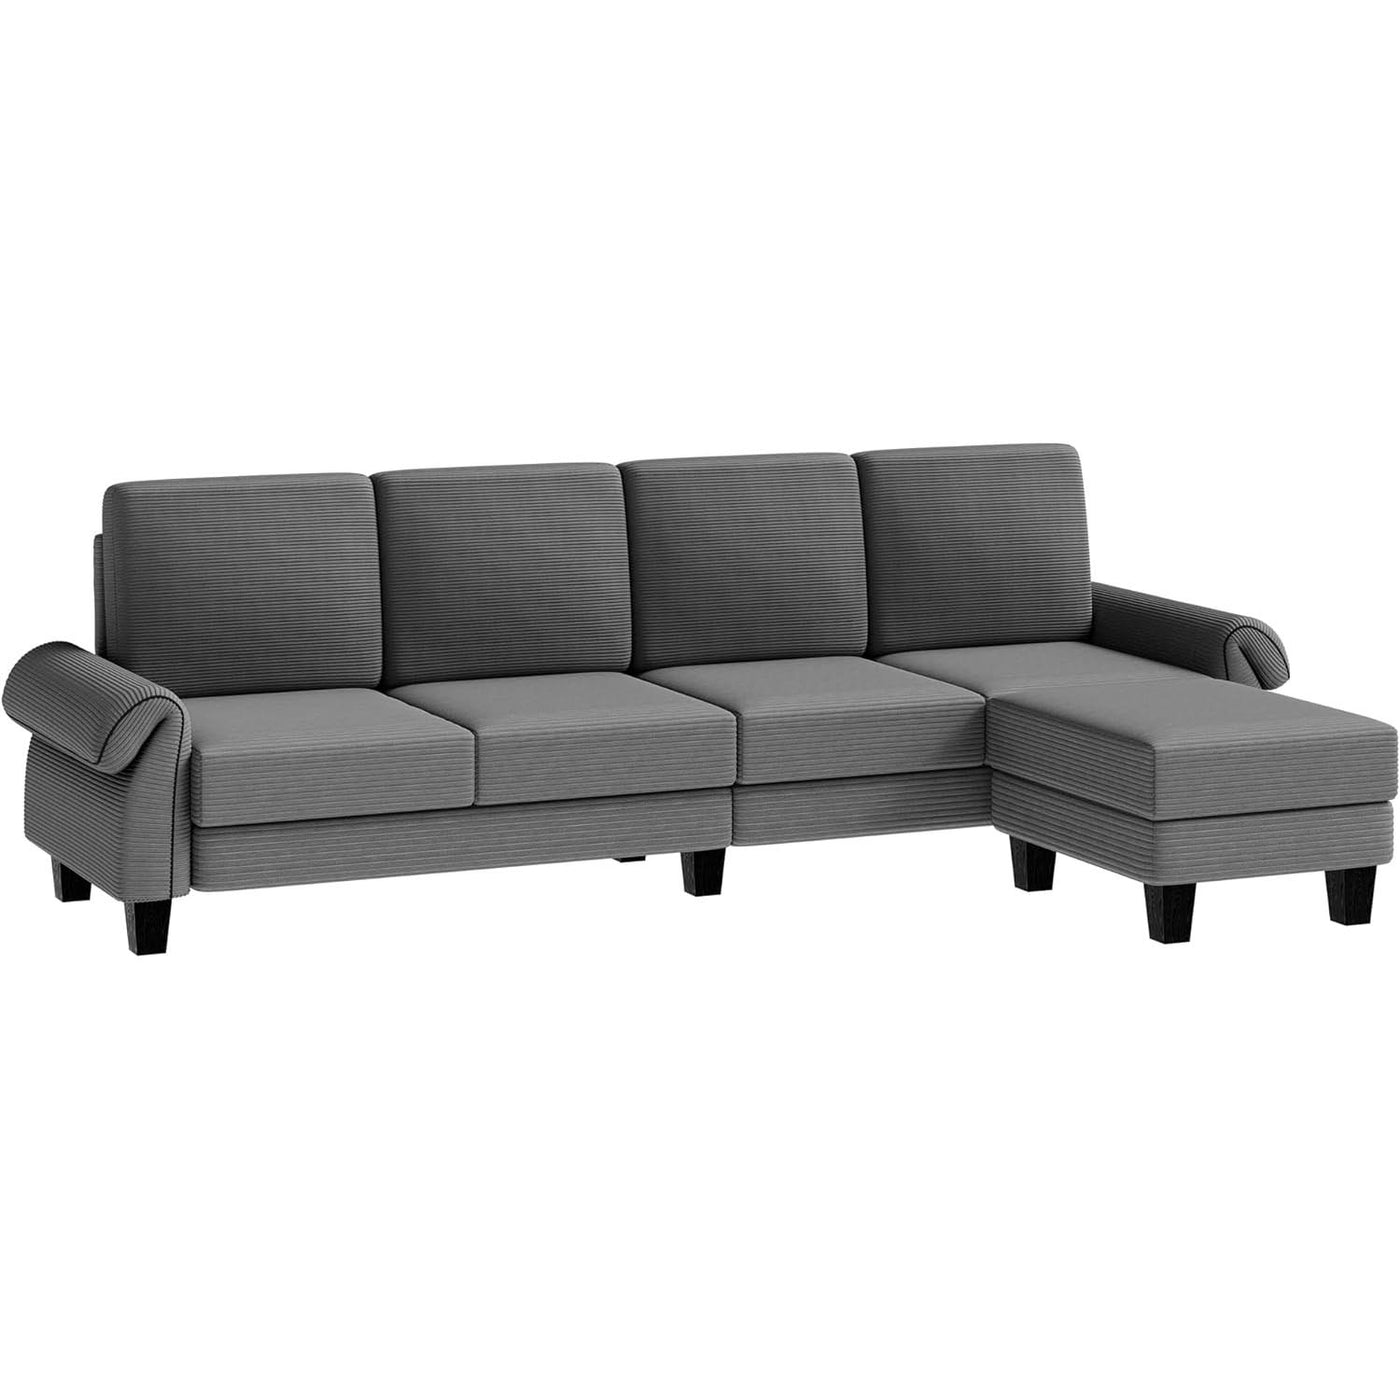 Walsunny Modular Sectional Sofa Couch with Removable Ottoman, 110inch L-Shaped Corduroy Fabric Sectional Sofa Couch for Living Room